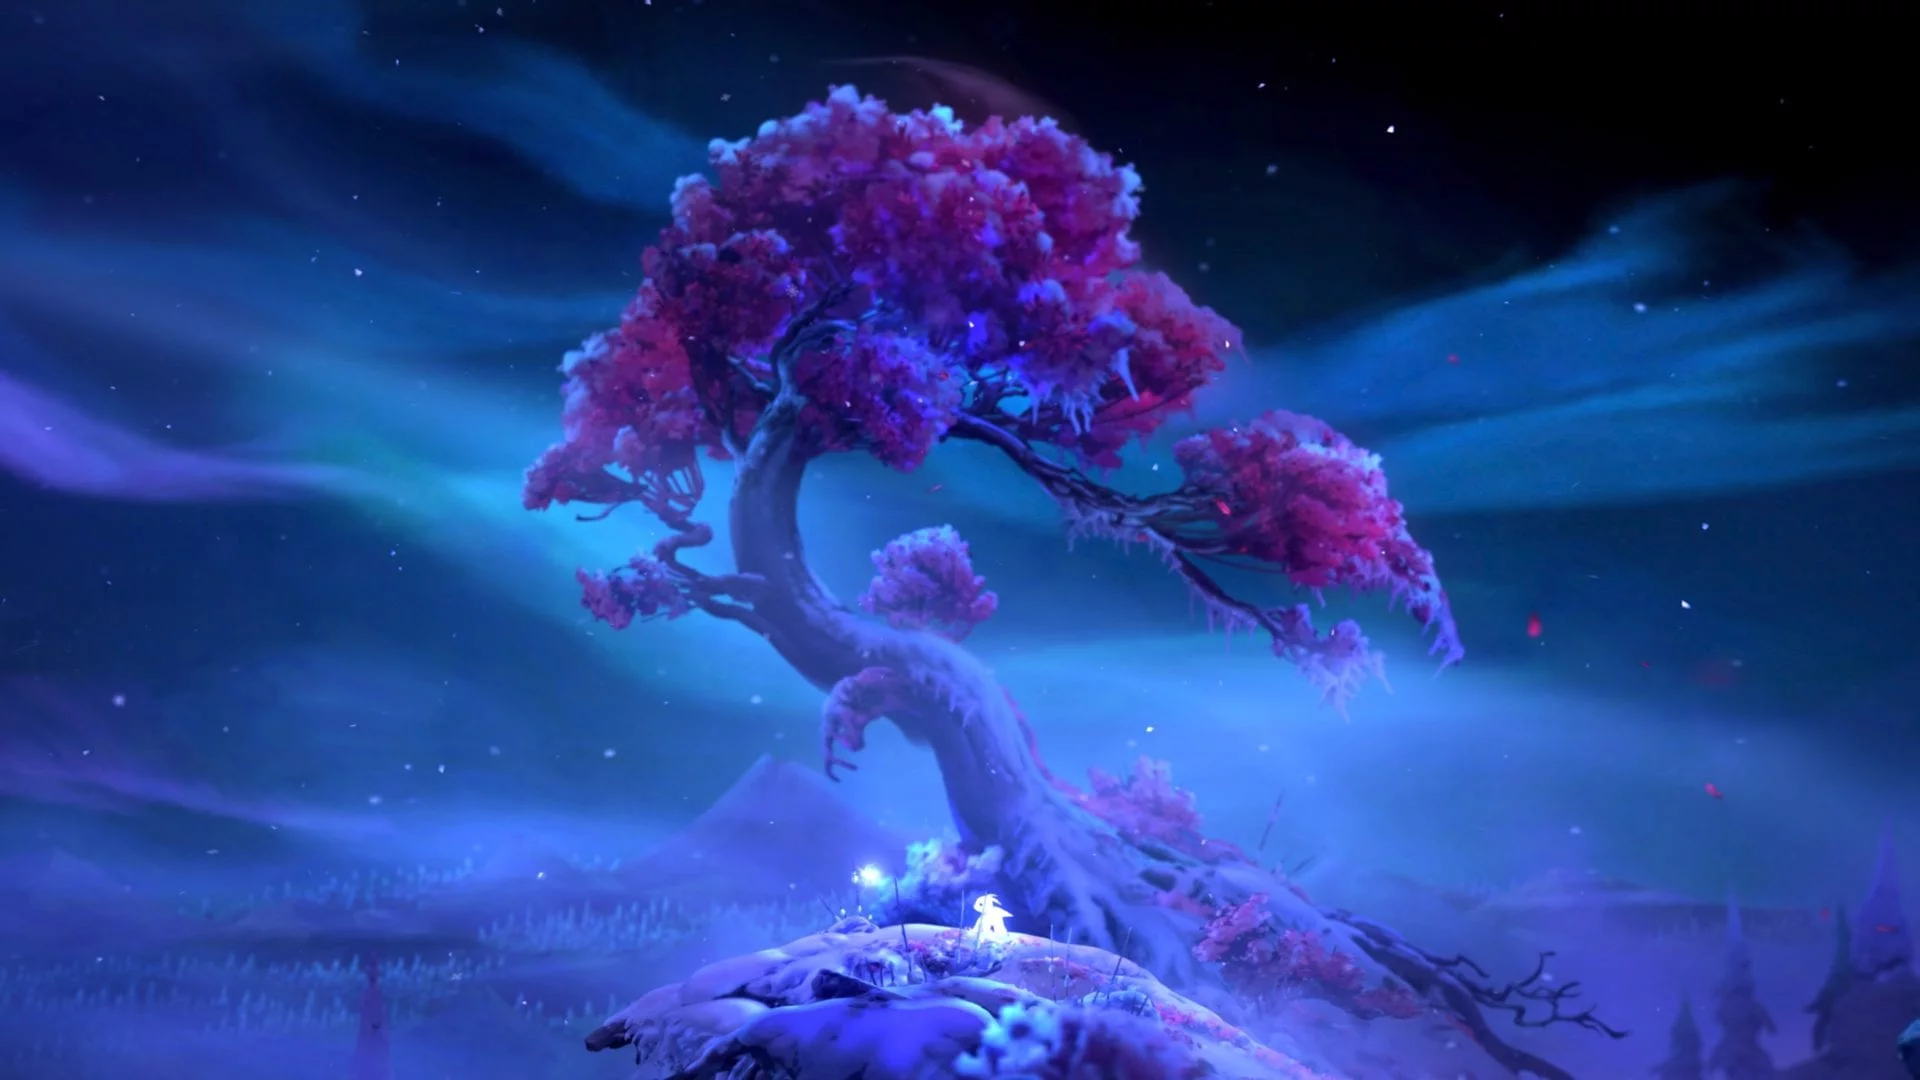 Ori and the Will of the Wisps topped Steam’s best-seller list upon launch